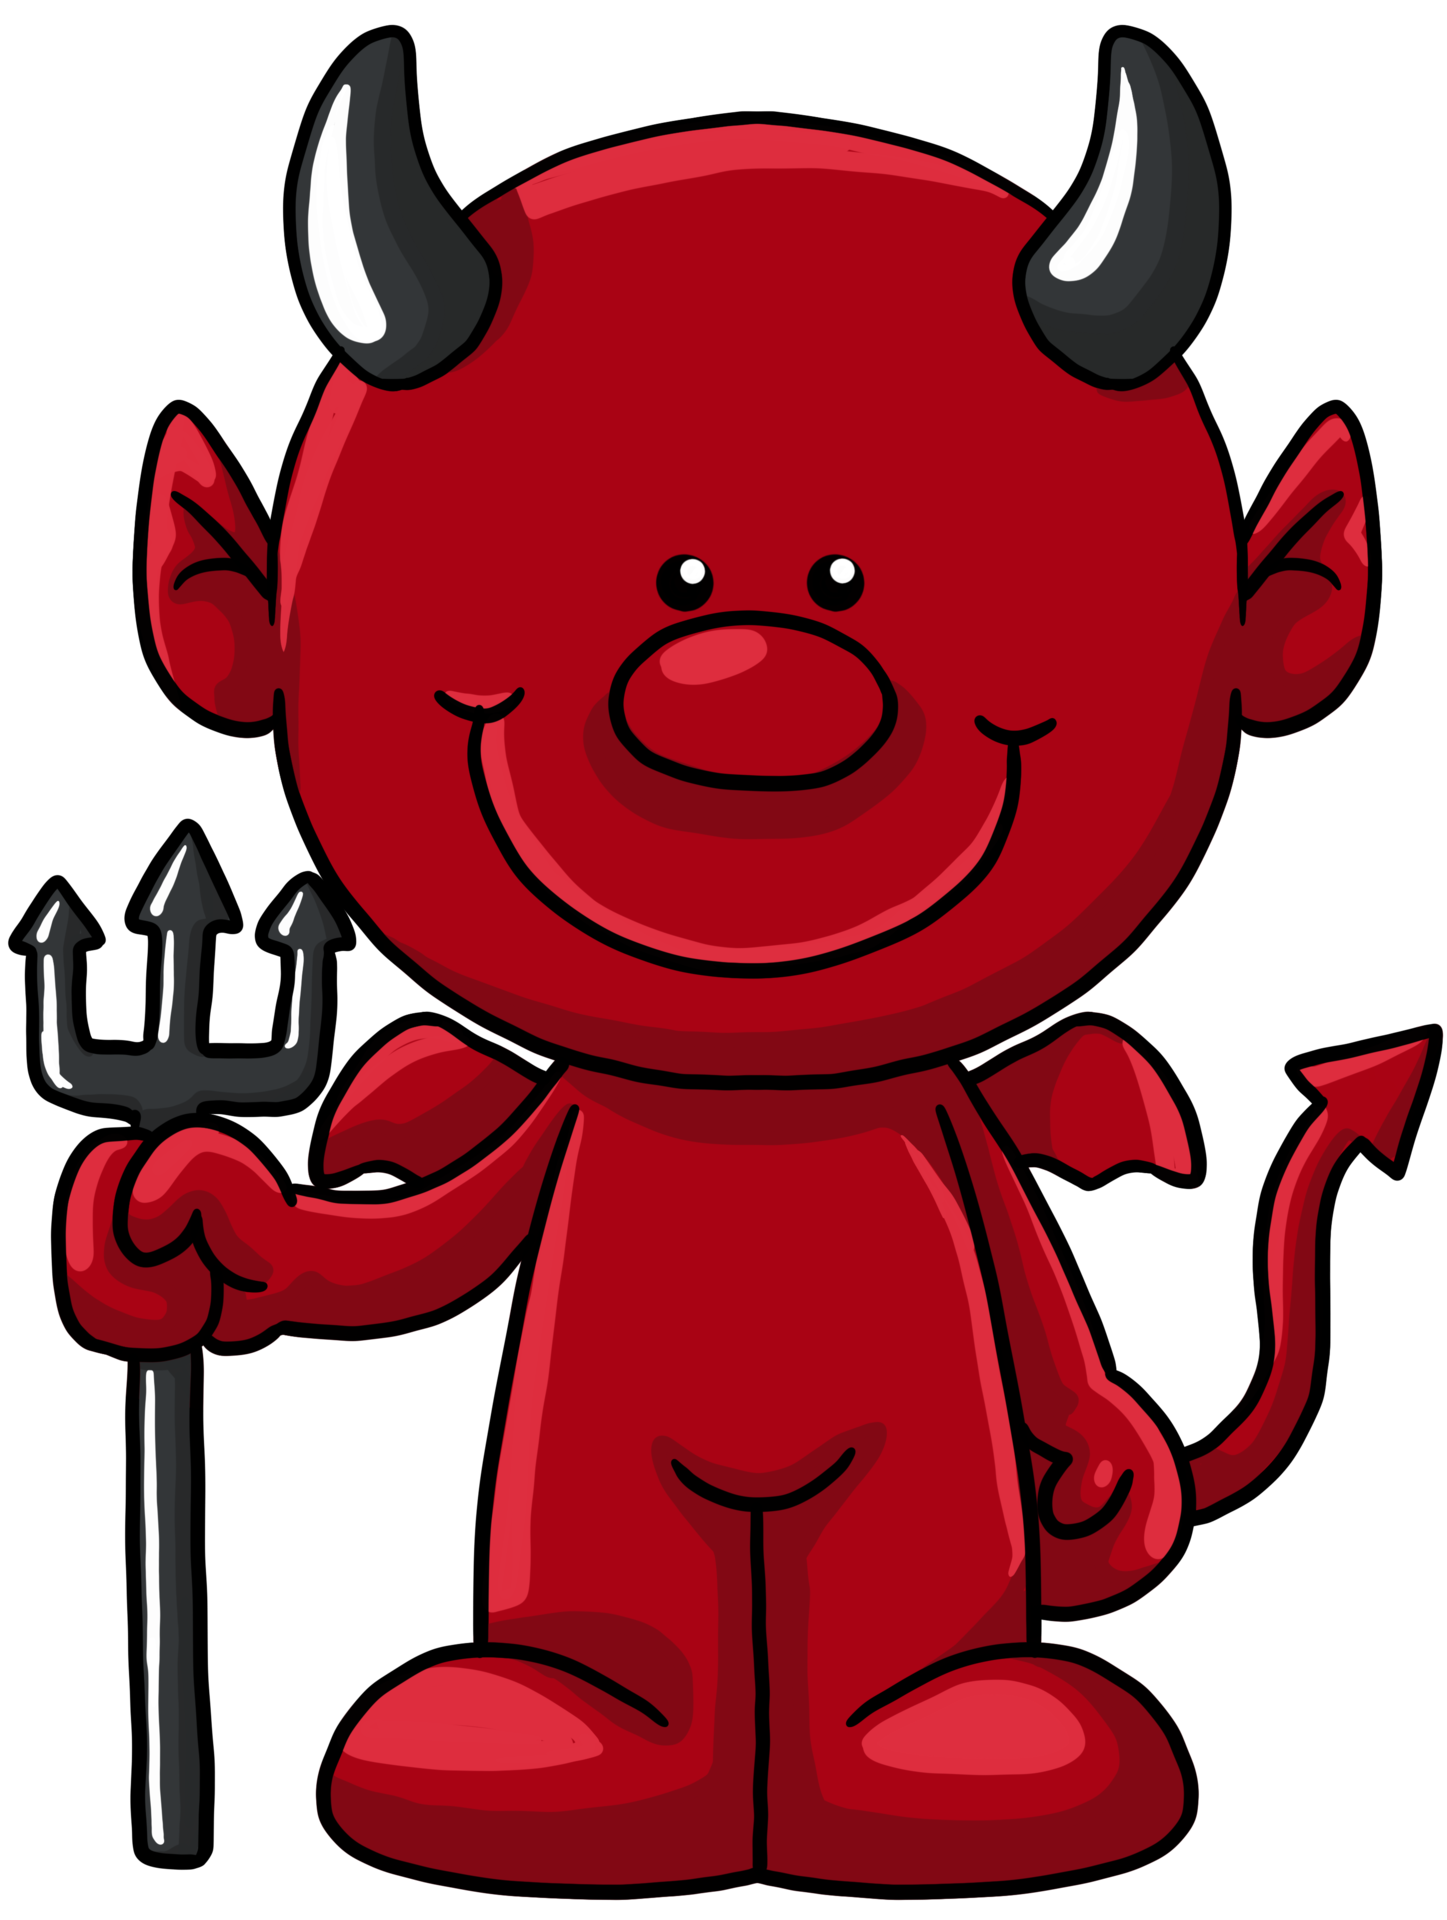 Devil PNGs for Free Download